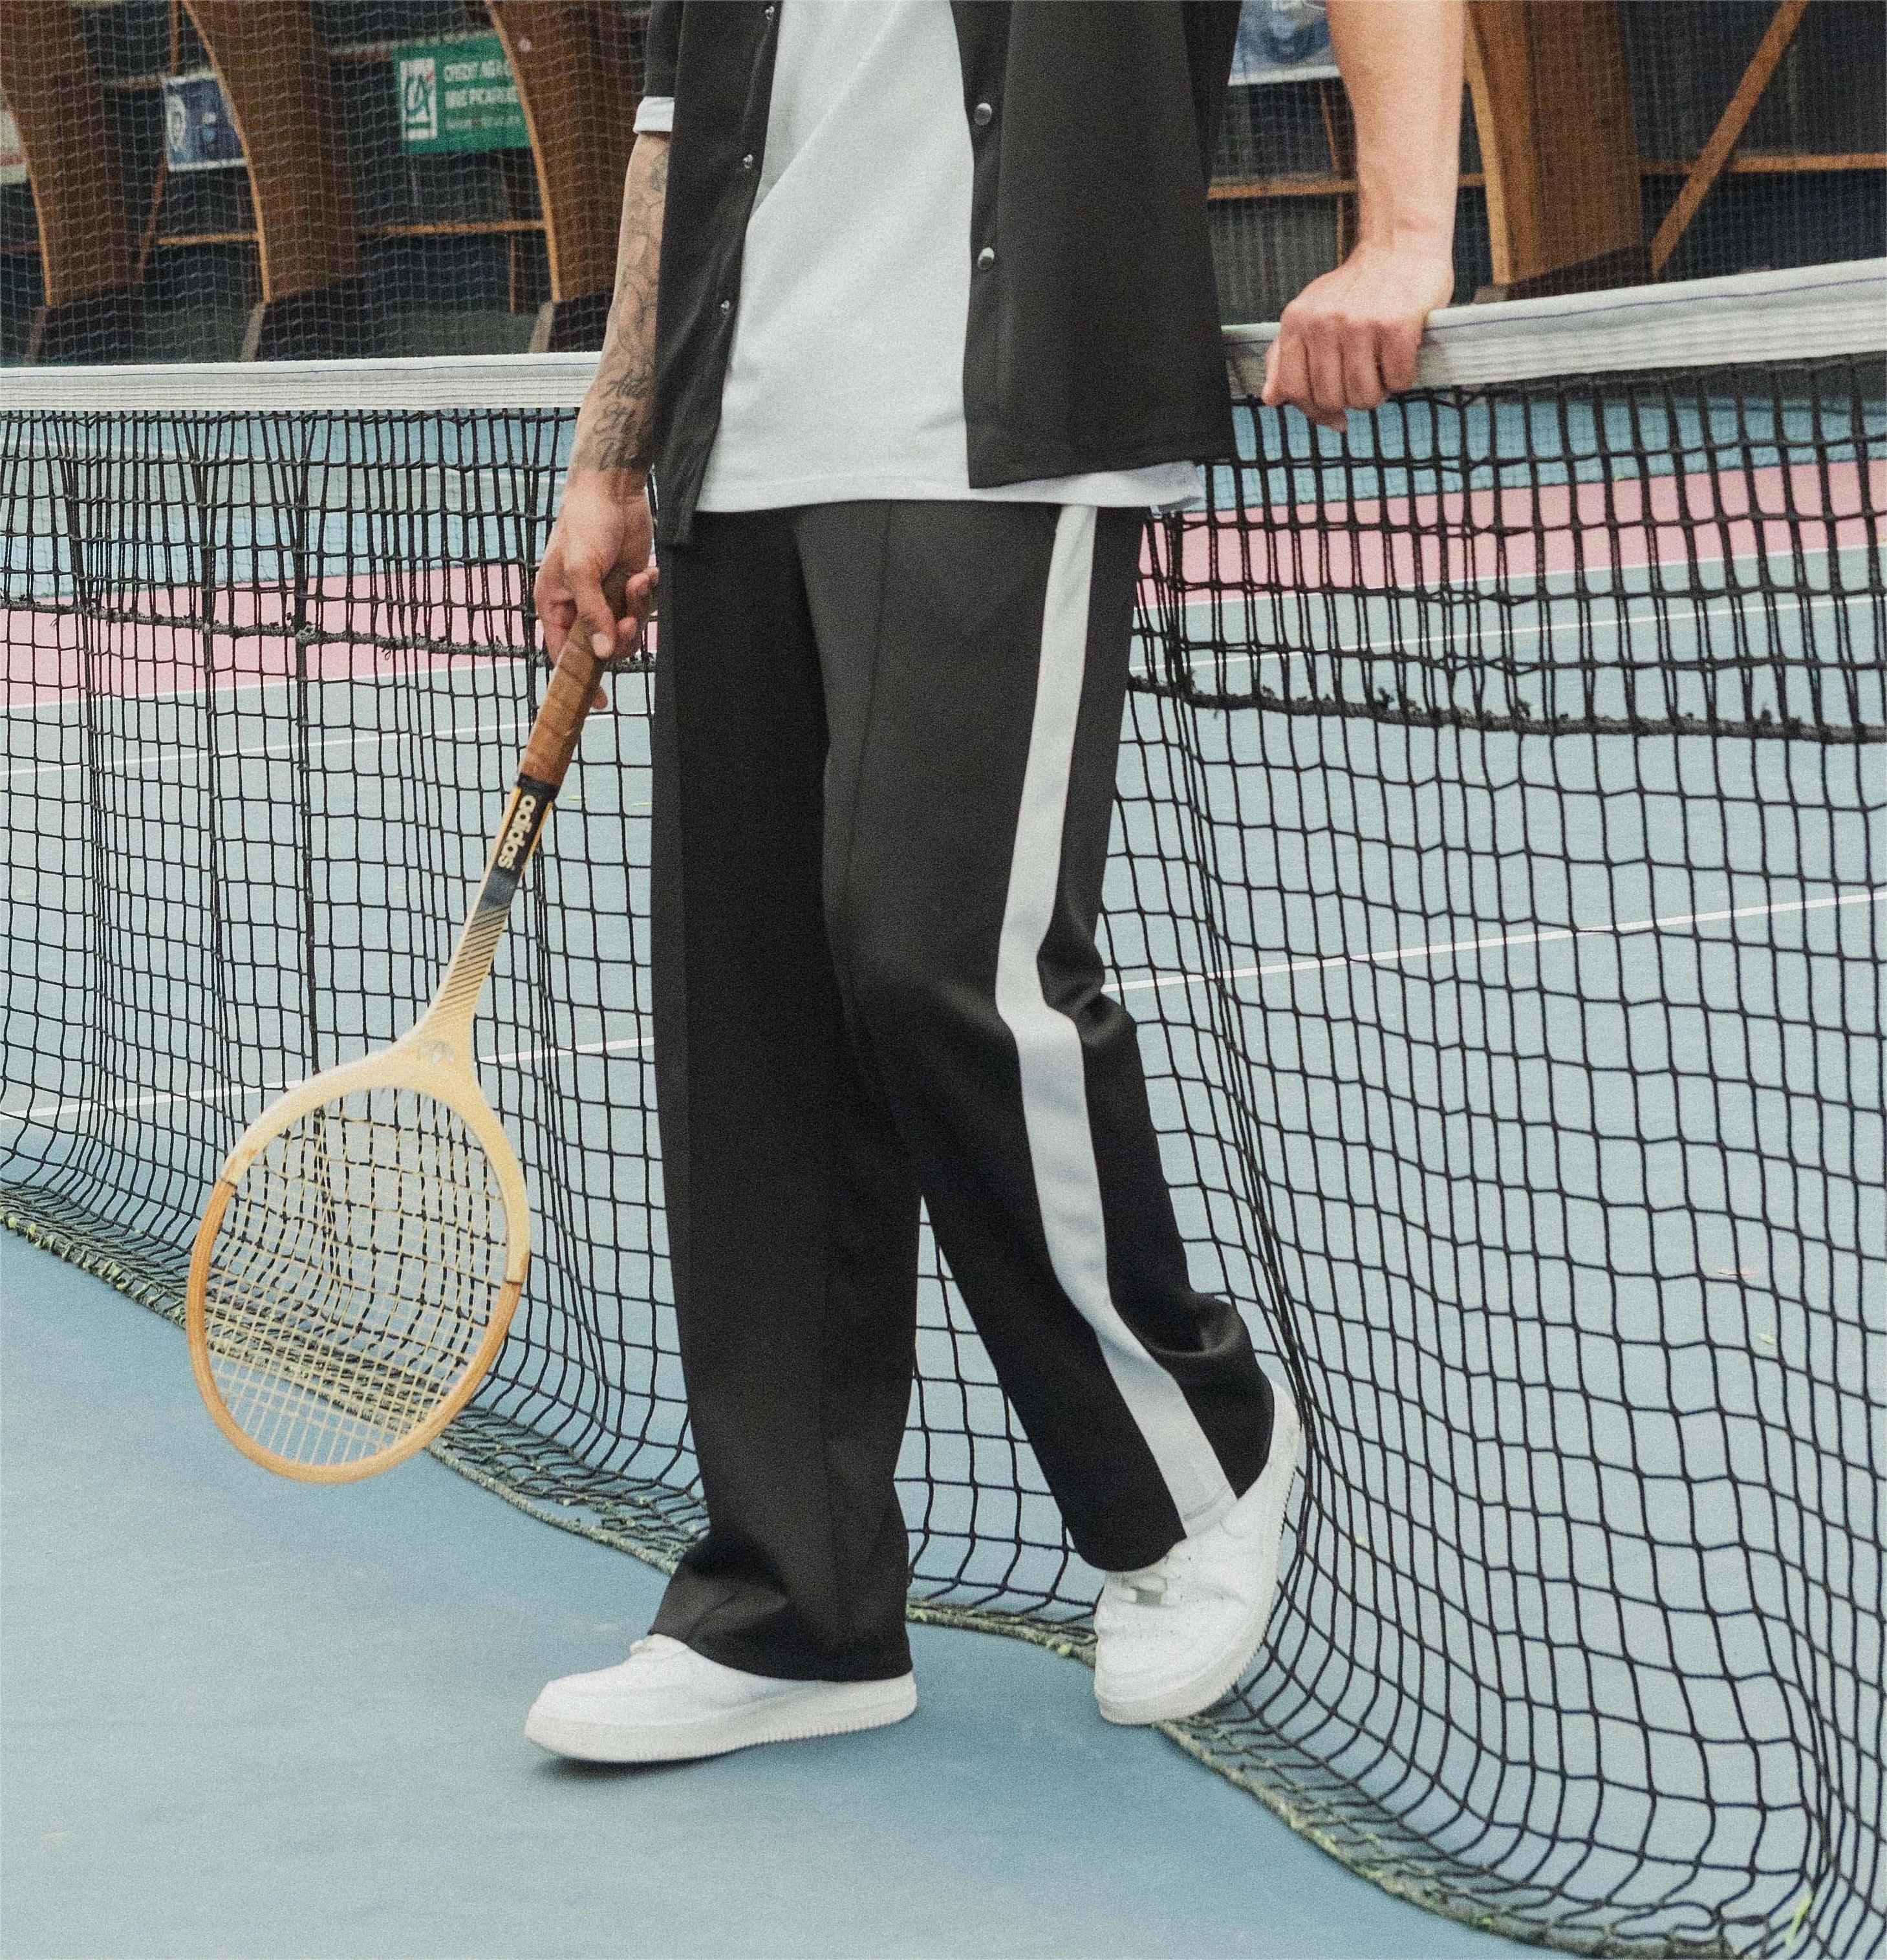 Wide jogging pants with bands along the legs